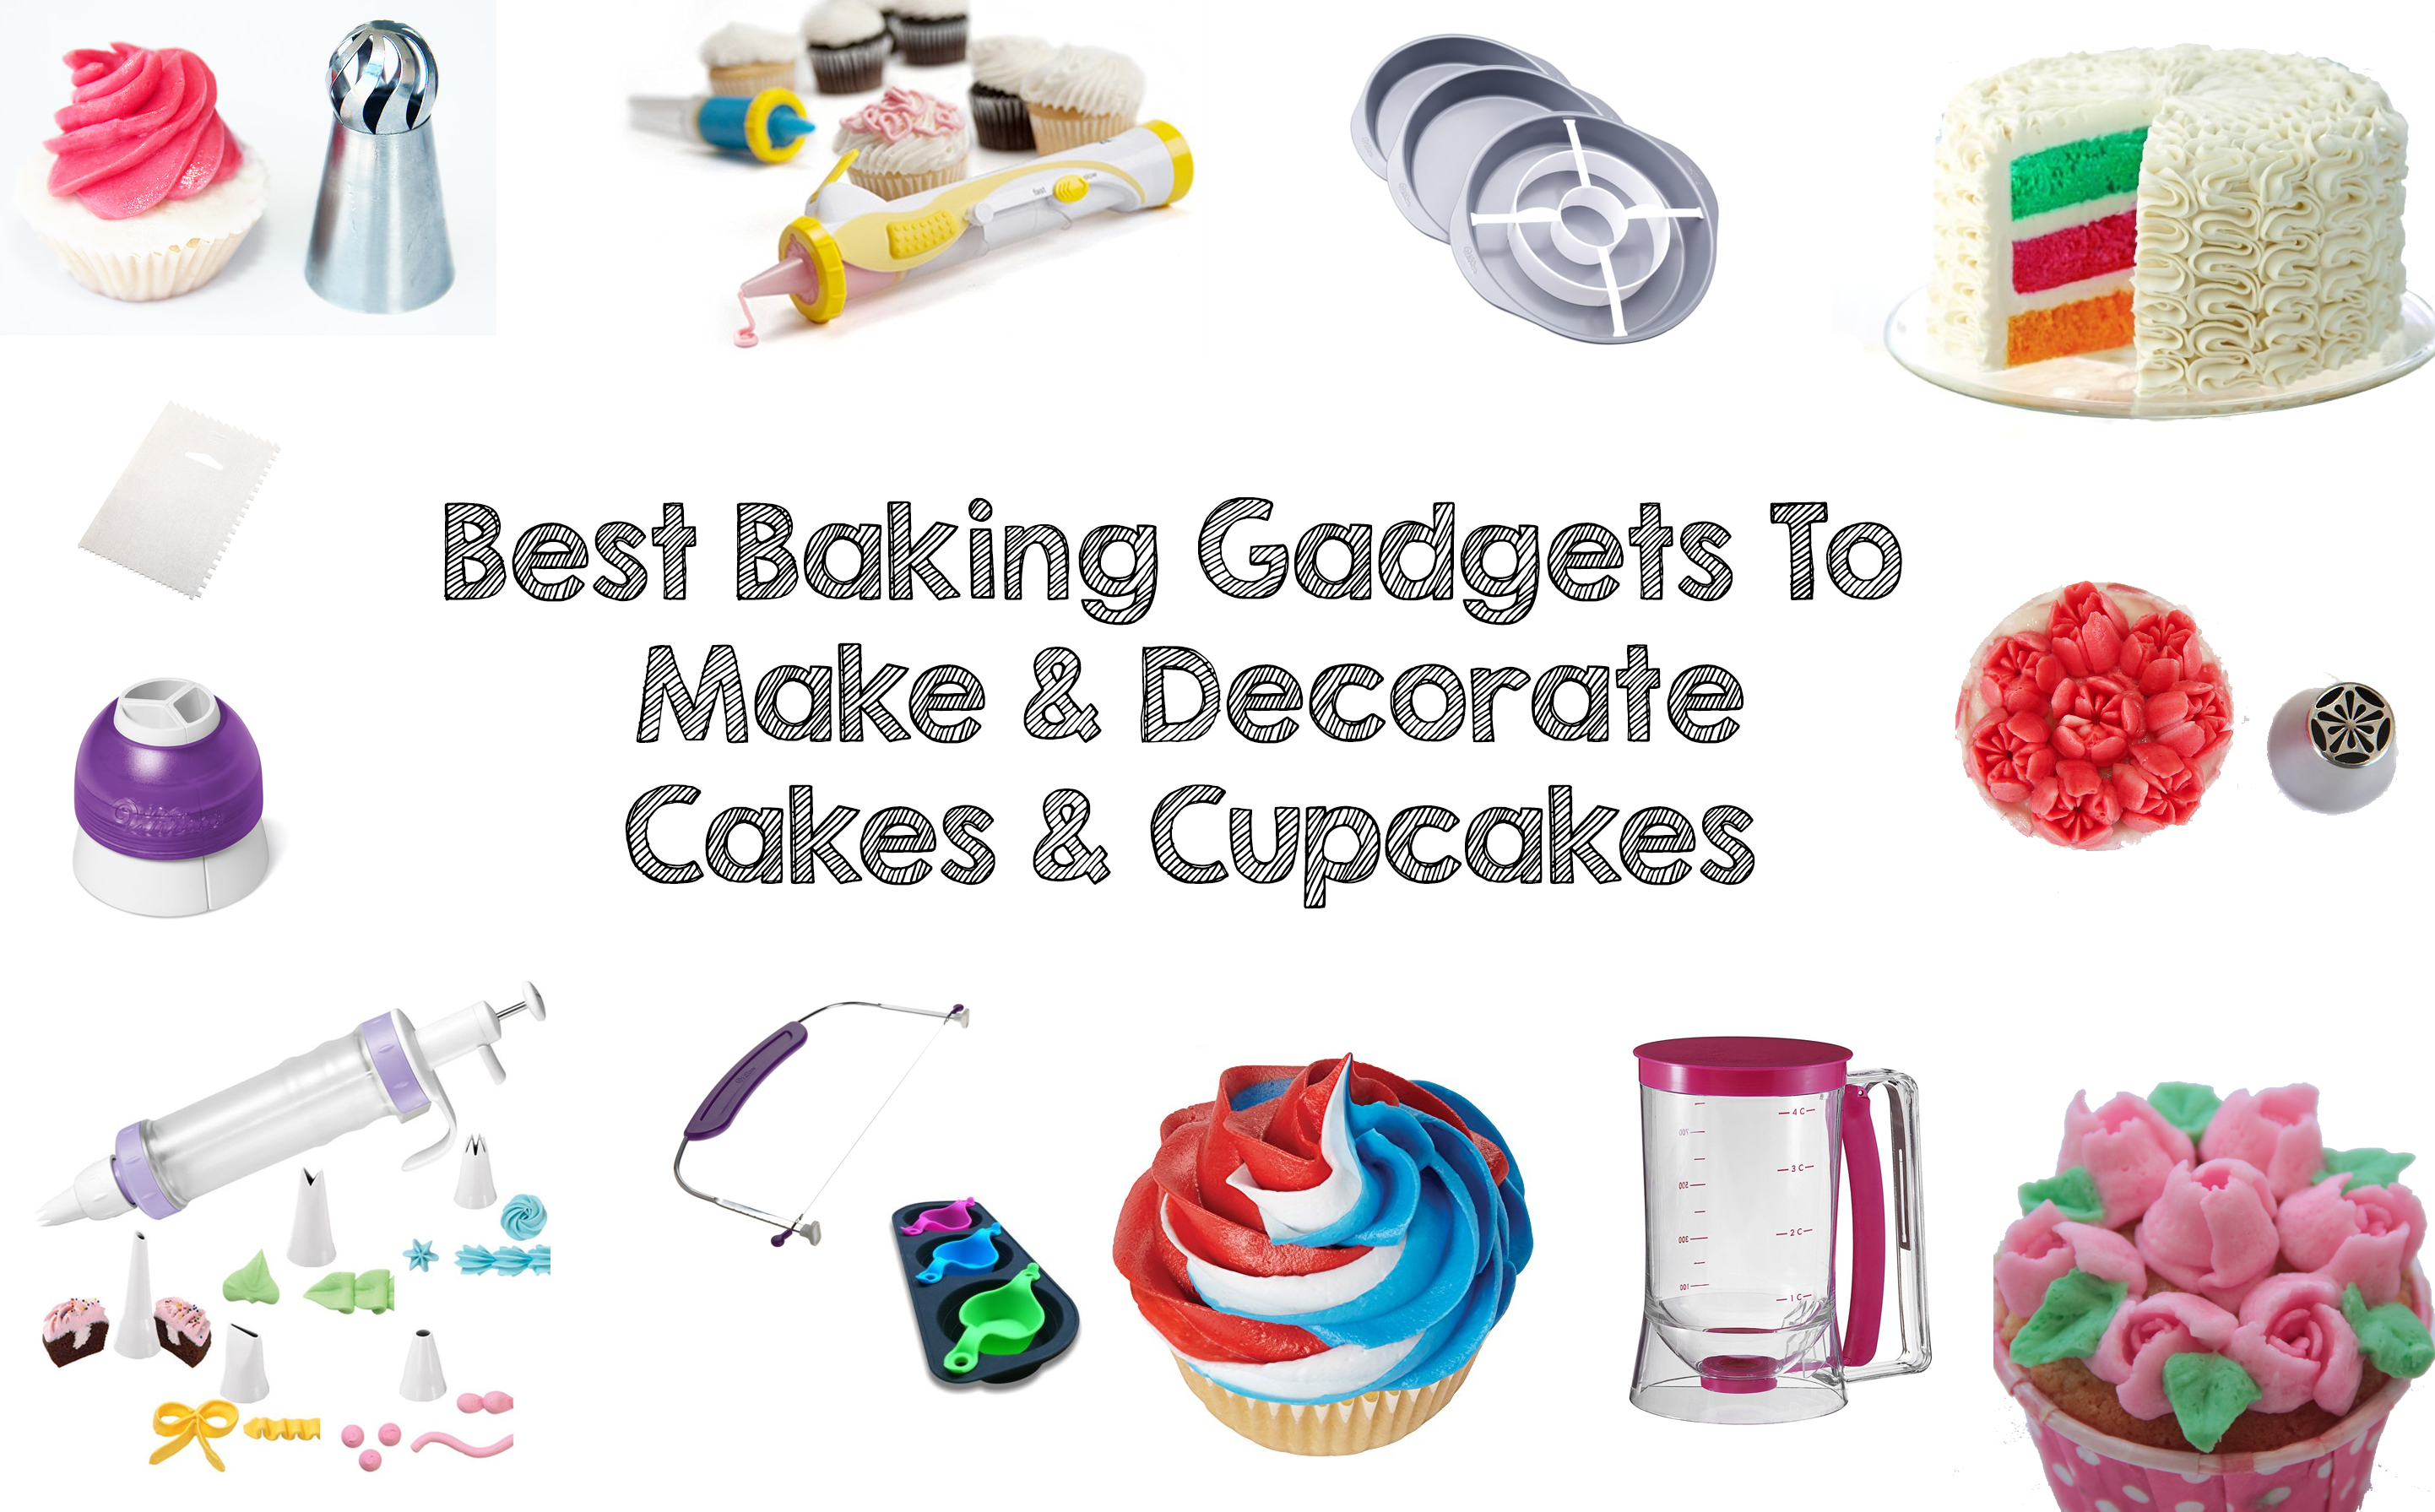 https://walyou.com/wp-content/uploads//2016/09/2016-Best-Baking-Gadgets-To-Make-Decorate-Cakes-Cupcakes.jpg